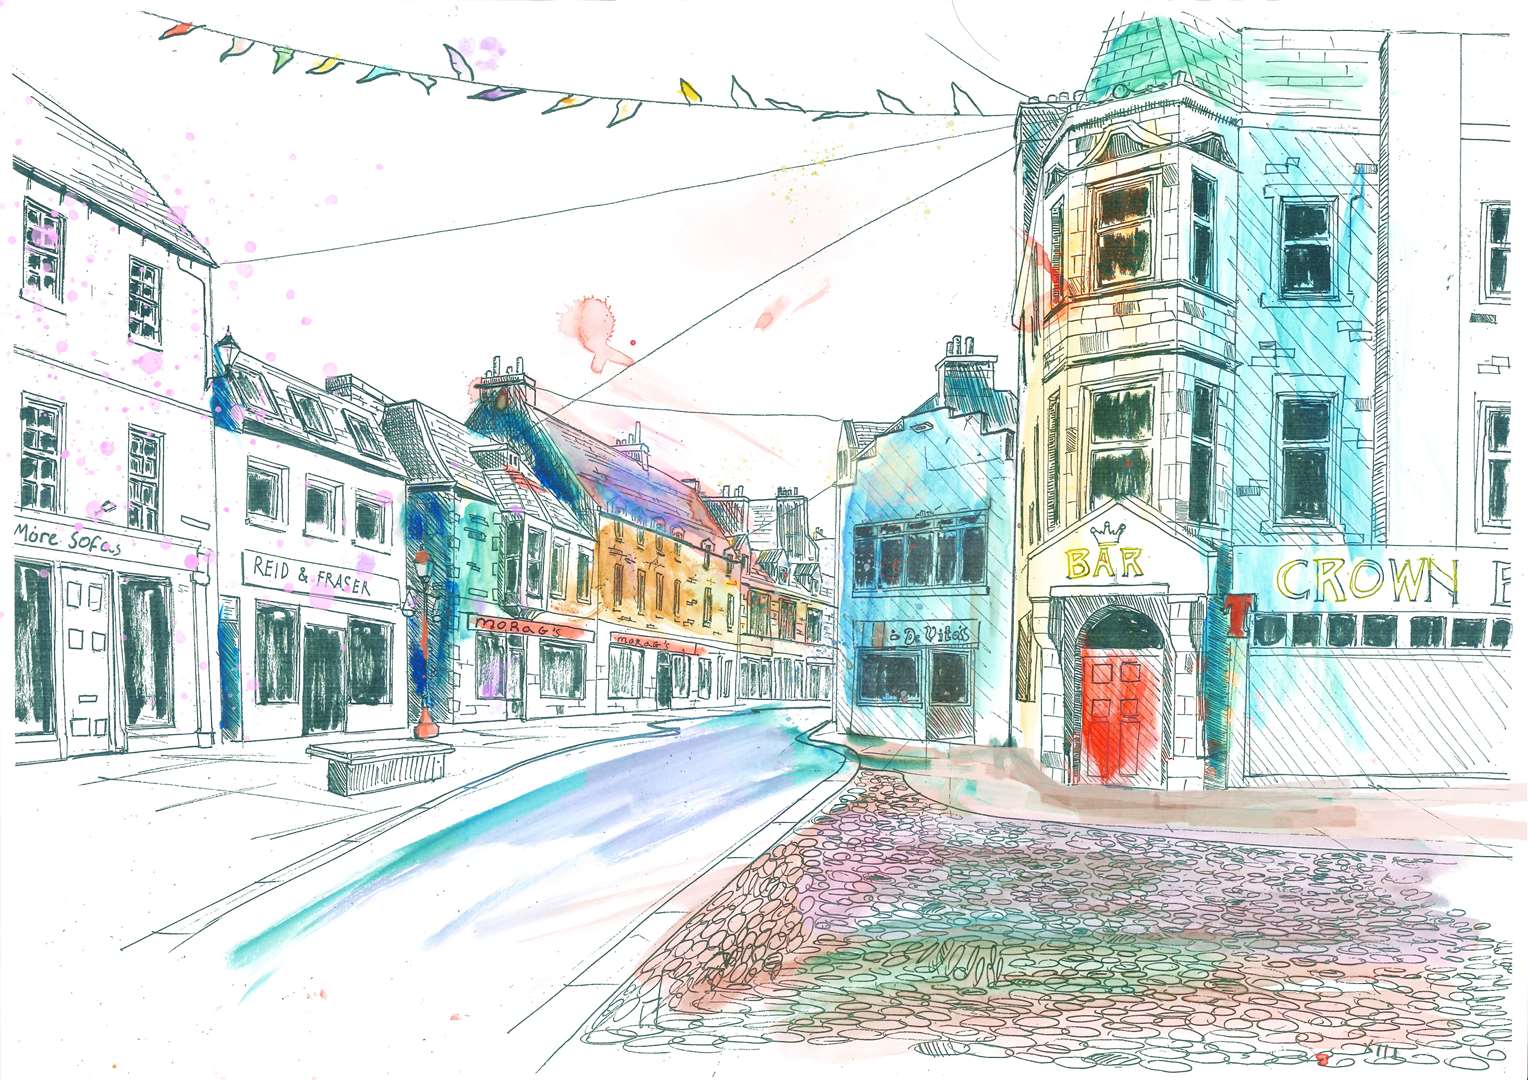 An artistic rendering of Wick High Street by JJ McGuckin for Sustrans. The regeneration project hopes to bring colour and vibrancy to the town centre.